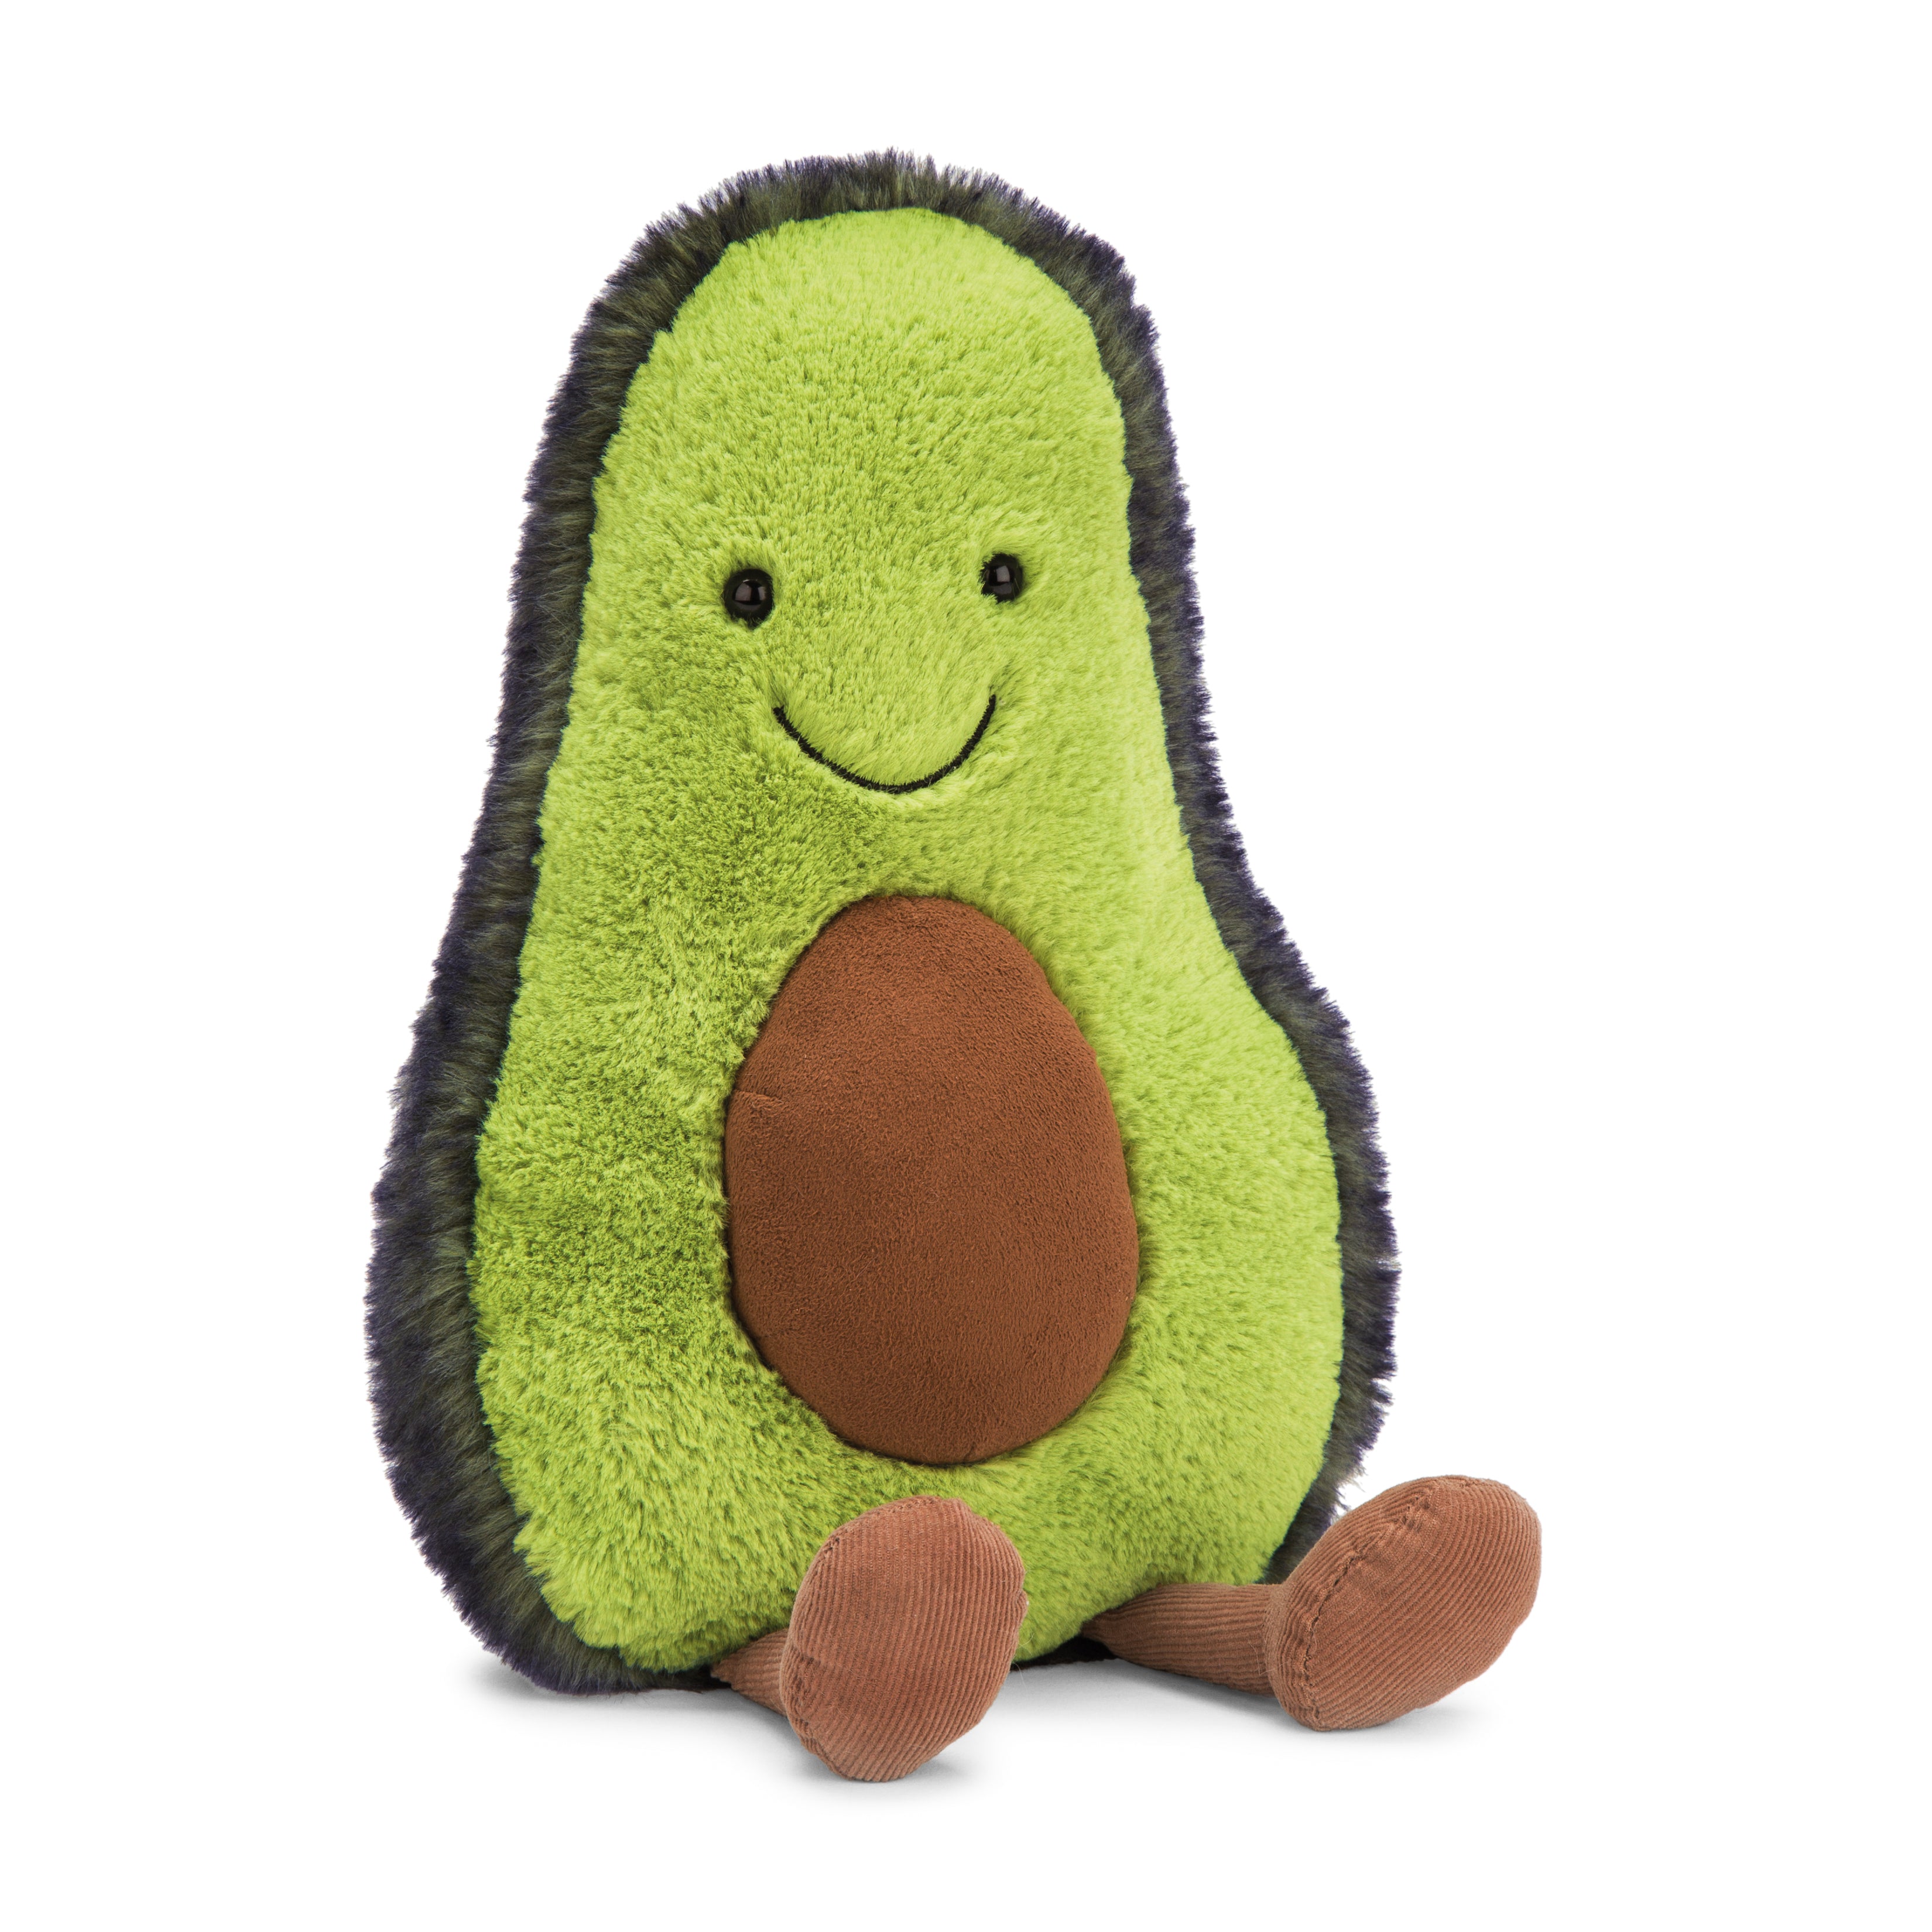 fluffy green and brown stuffed plush toy avocado with black smily face